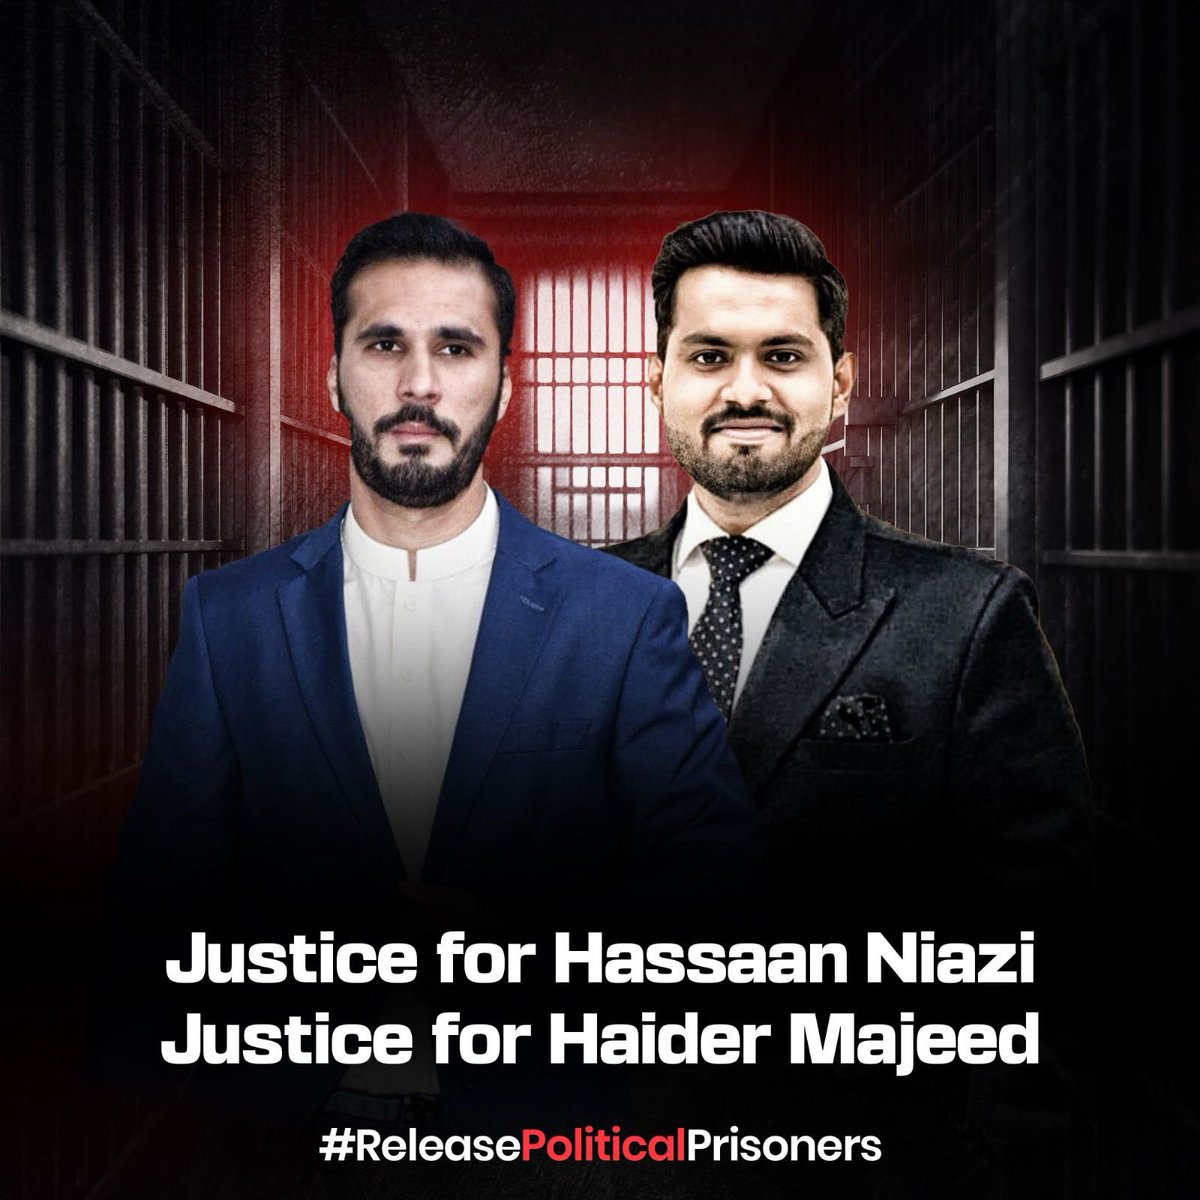 When injustice becomes law, resistance becomes duty.

#ReleaseHassanNiazi 
#ReleaseHaiderMajeed
#ReleasePoliticalPrisoners